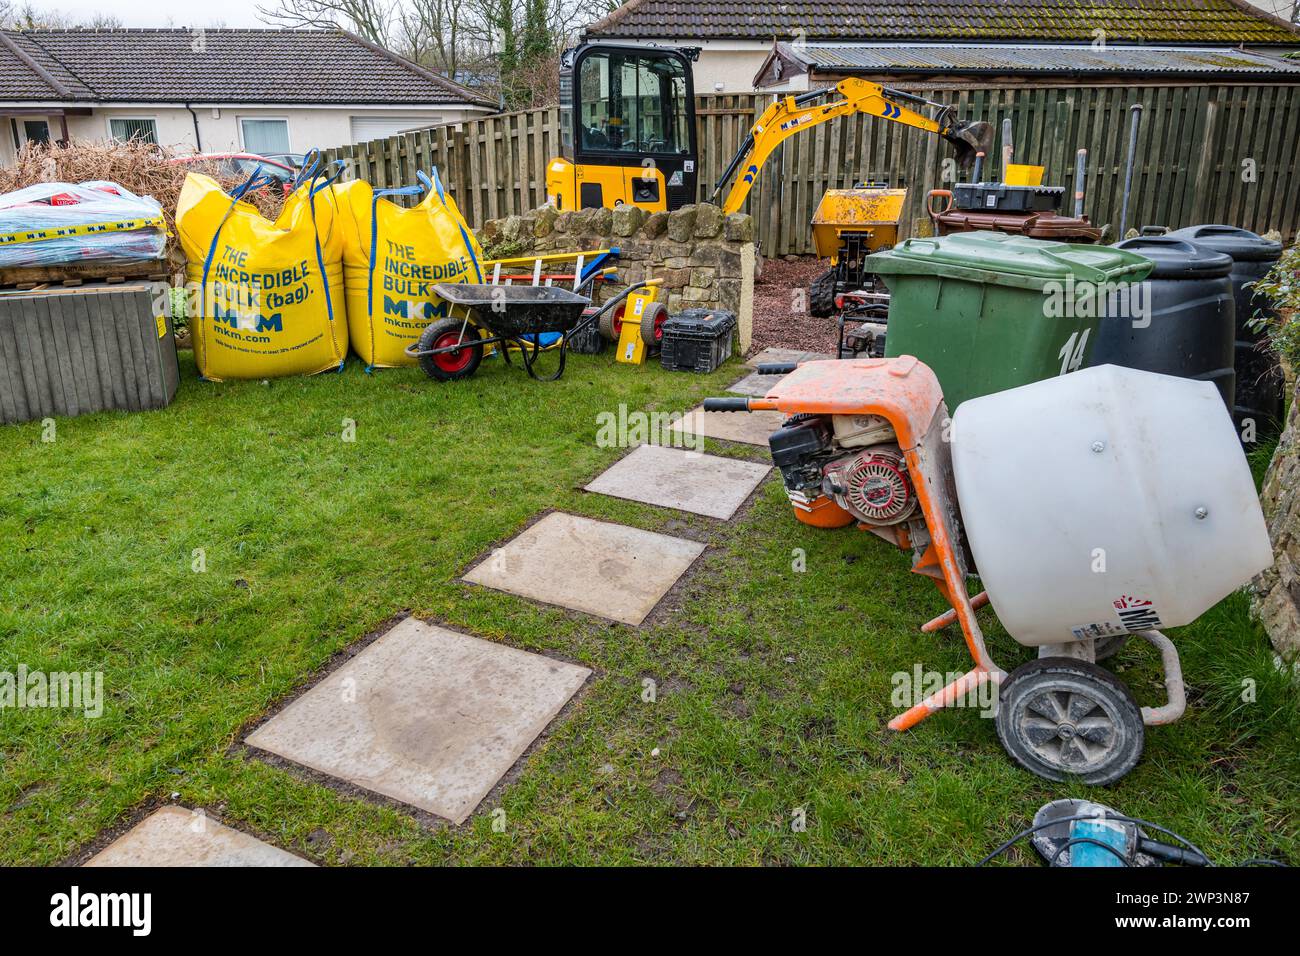 Machinery (small digger, dumper & cement mixer) for construction work in a driveway to build a garden room, Scotland, UK Stock Photo